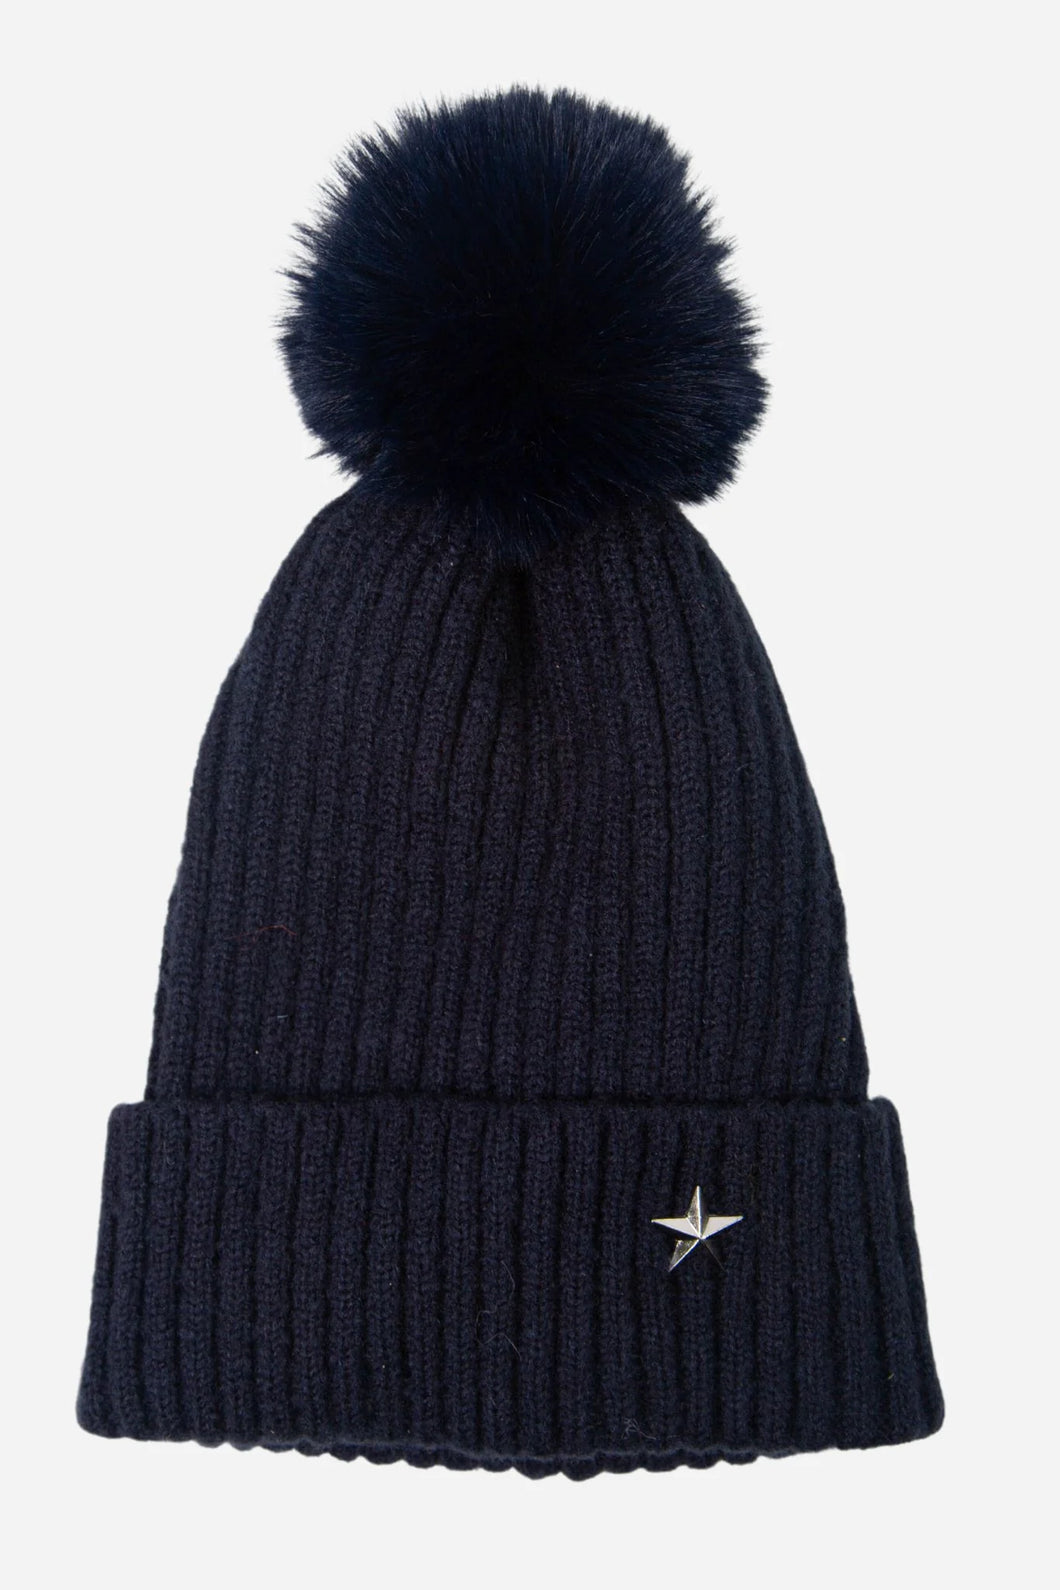 Navy bobble hat with a small silver star detail and faux fur pom pom